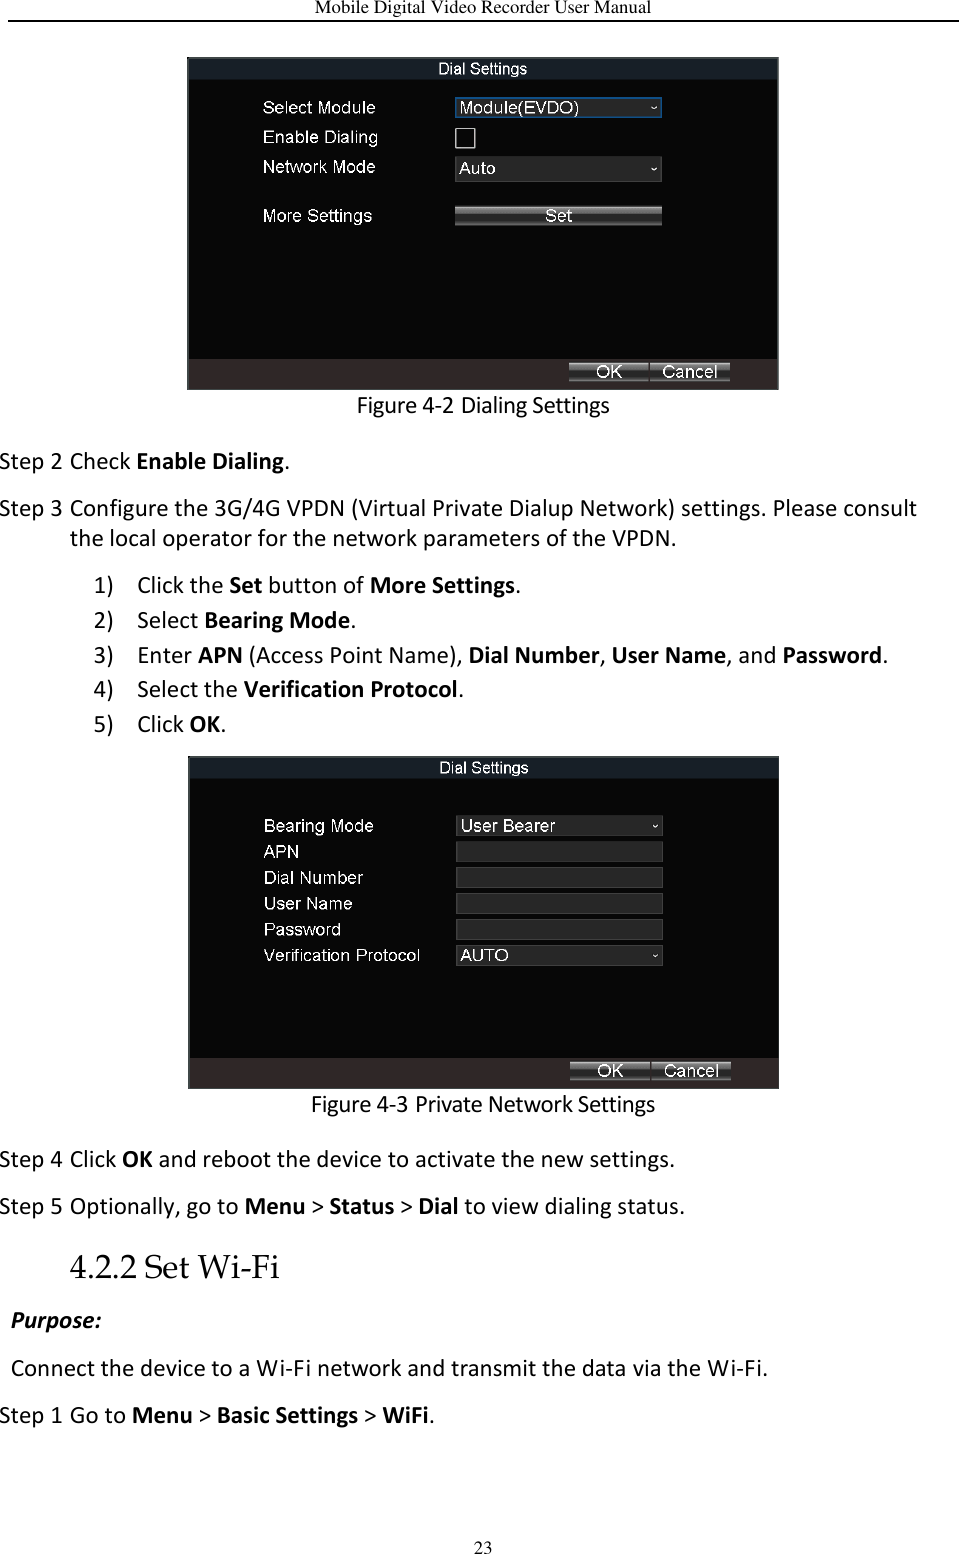 Mobile Digital Video Recorder User Manual 23  Figure 4-2 Dialing Settings Step 2 Check Enable Dialing. Step 3 Configure the 3G/4G VPDN (Virtual Private Dialup Network) settings. Please consult the local operator for the network parameters of the VPDN. 1) Click the Set button of More Settings. 2) Select Bearing Mode. 3) Enter APN (Access Point Name), Dial Number, User Name, and Password.   4) Select the Verification Protocol. 5) Click OK.  Figure 4-3 Private Network Settings Step 4 Click OK and reboot the device to activate the new settings. Step 5 Optionally, go to Menu &gt; Status &gt; Dial to view dialing status. 4.2.2 Set Wi-Fi Purpose: Connect the device to a Wi-Fi network and transmit the data via the Wi-Fi. Step 1 Go to Menu &gt; Basic Settings &gt; WiFi. 